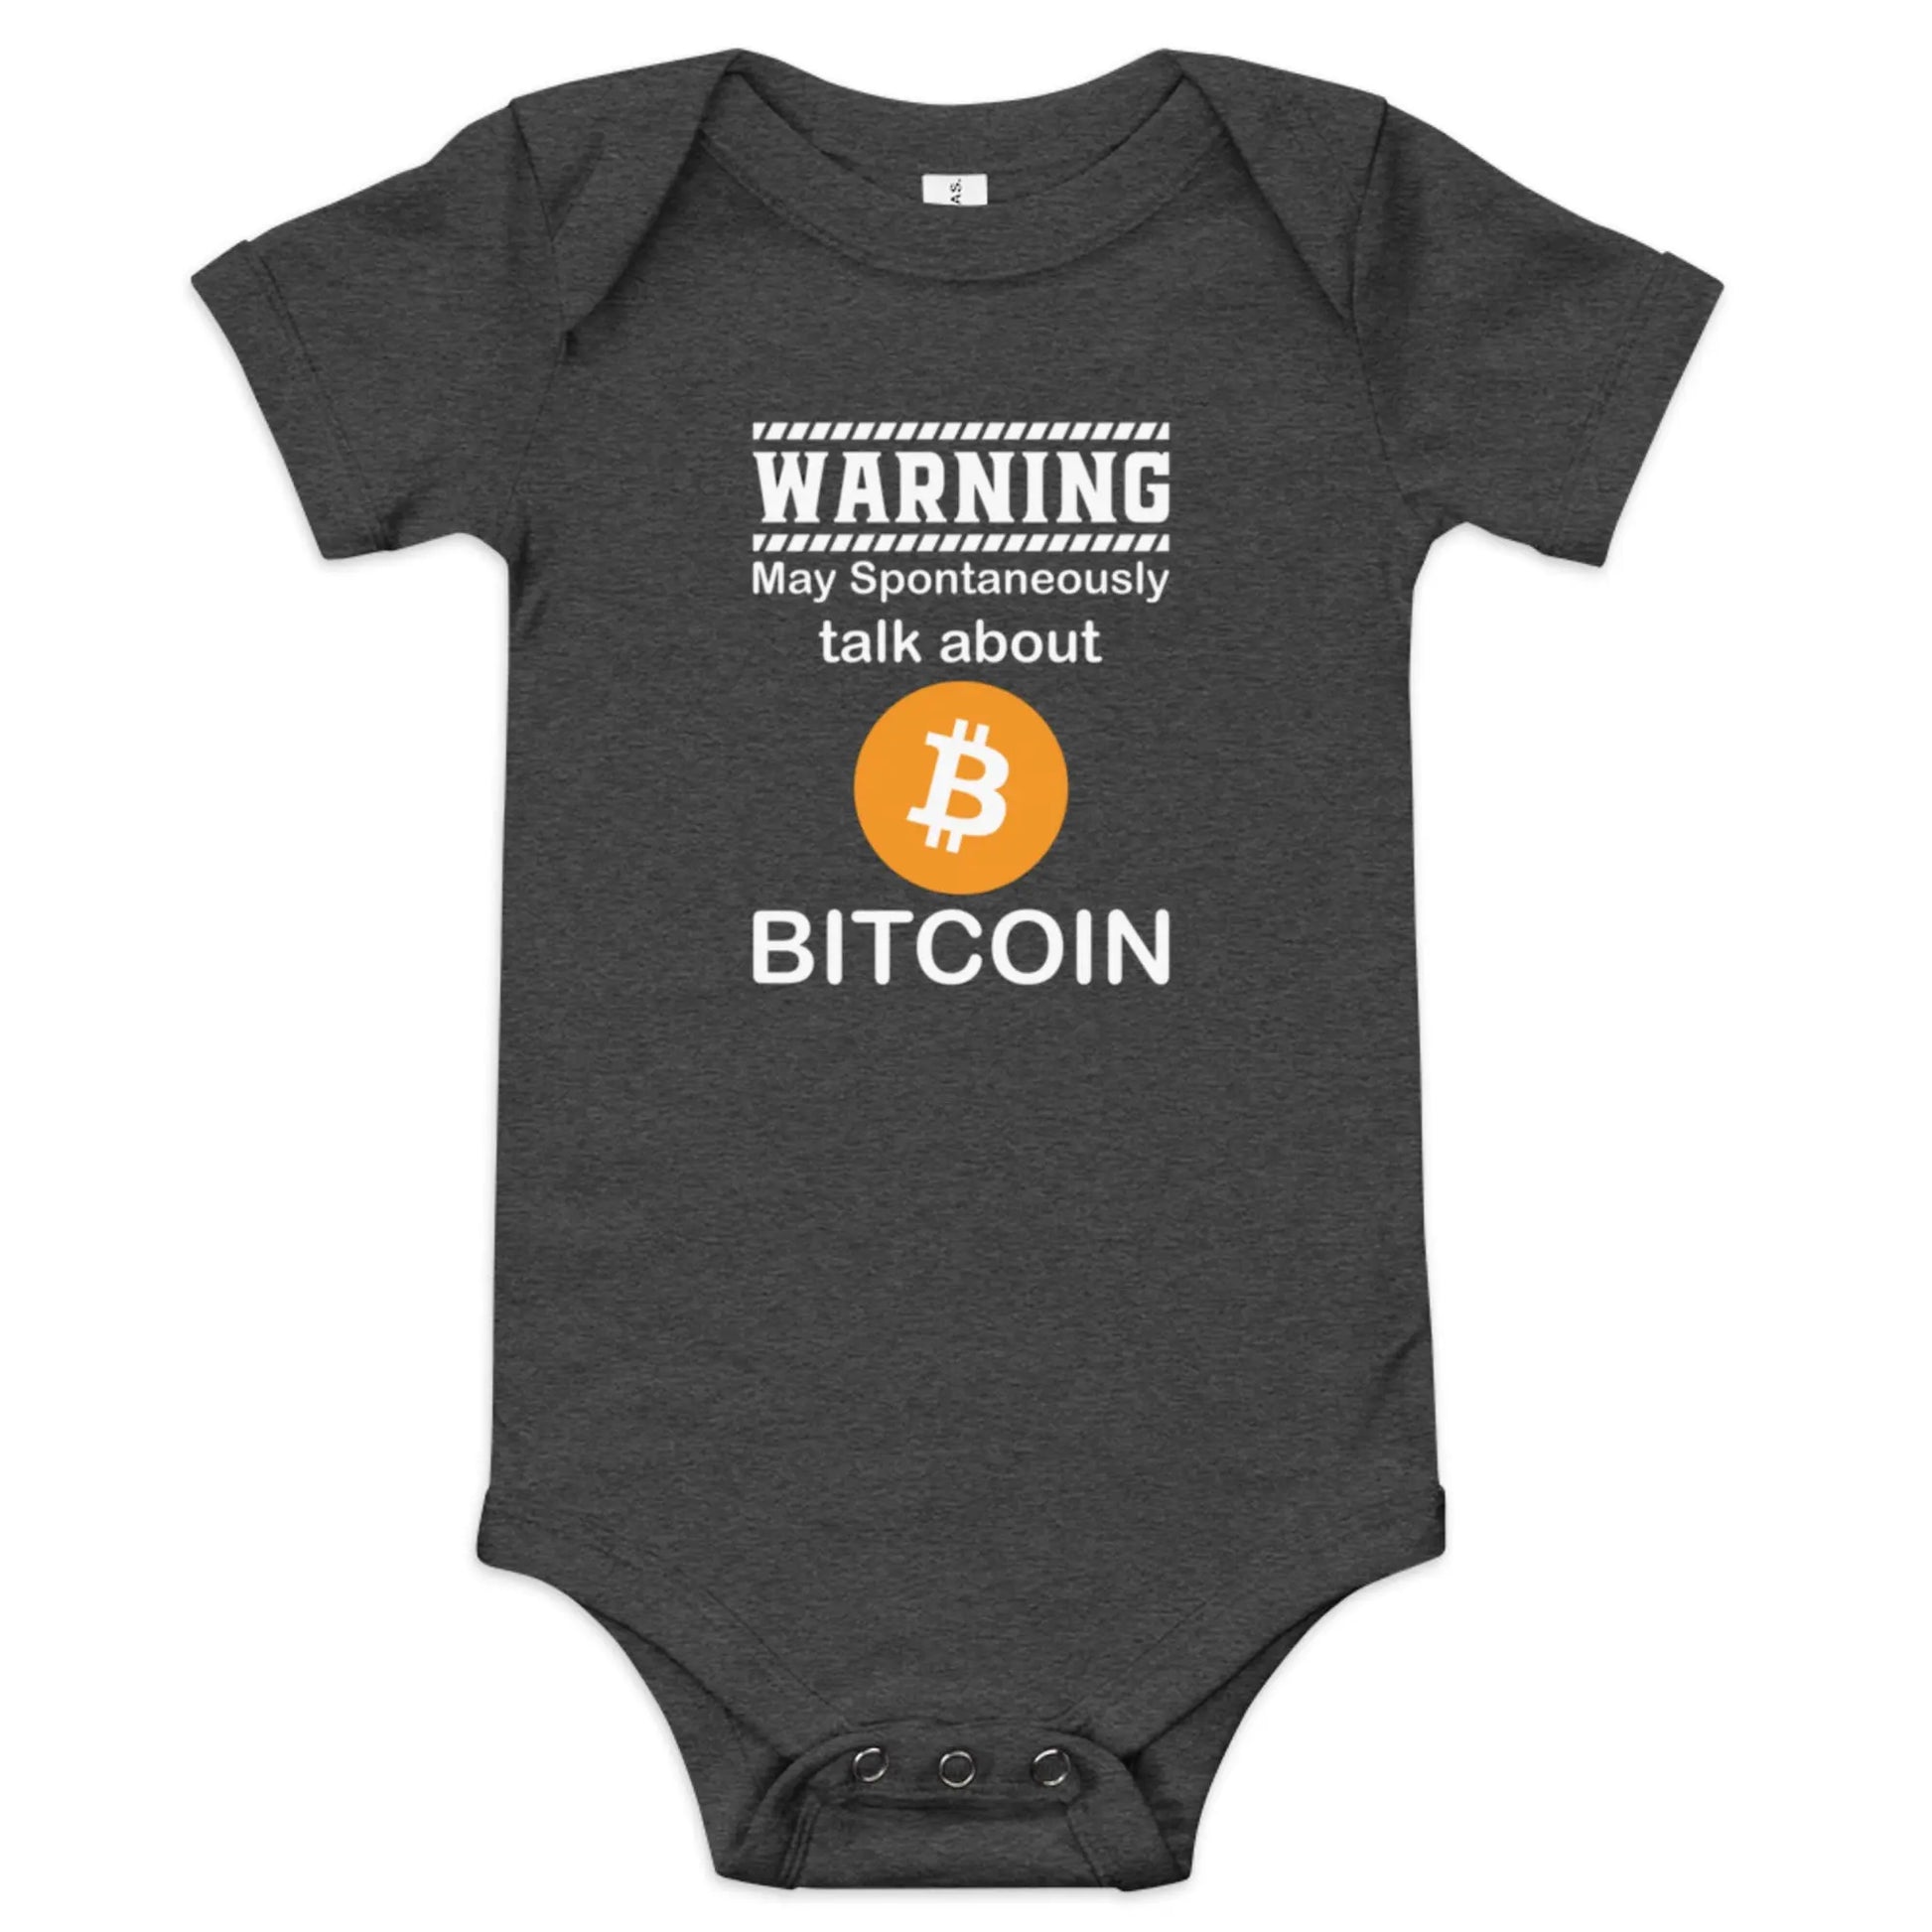 Talk About Bitcoin - Baby Bitcoin Body Suit - One Piece with Short Sleeve Grey